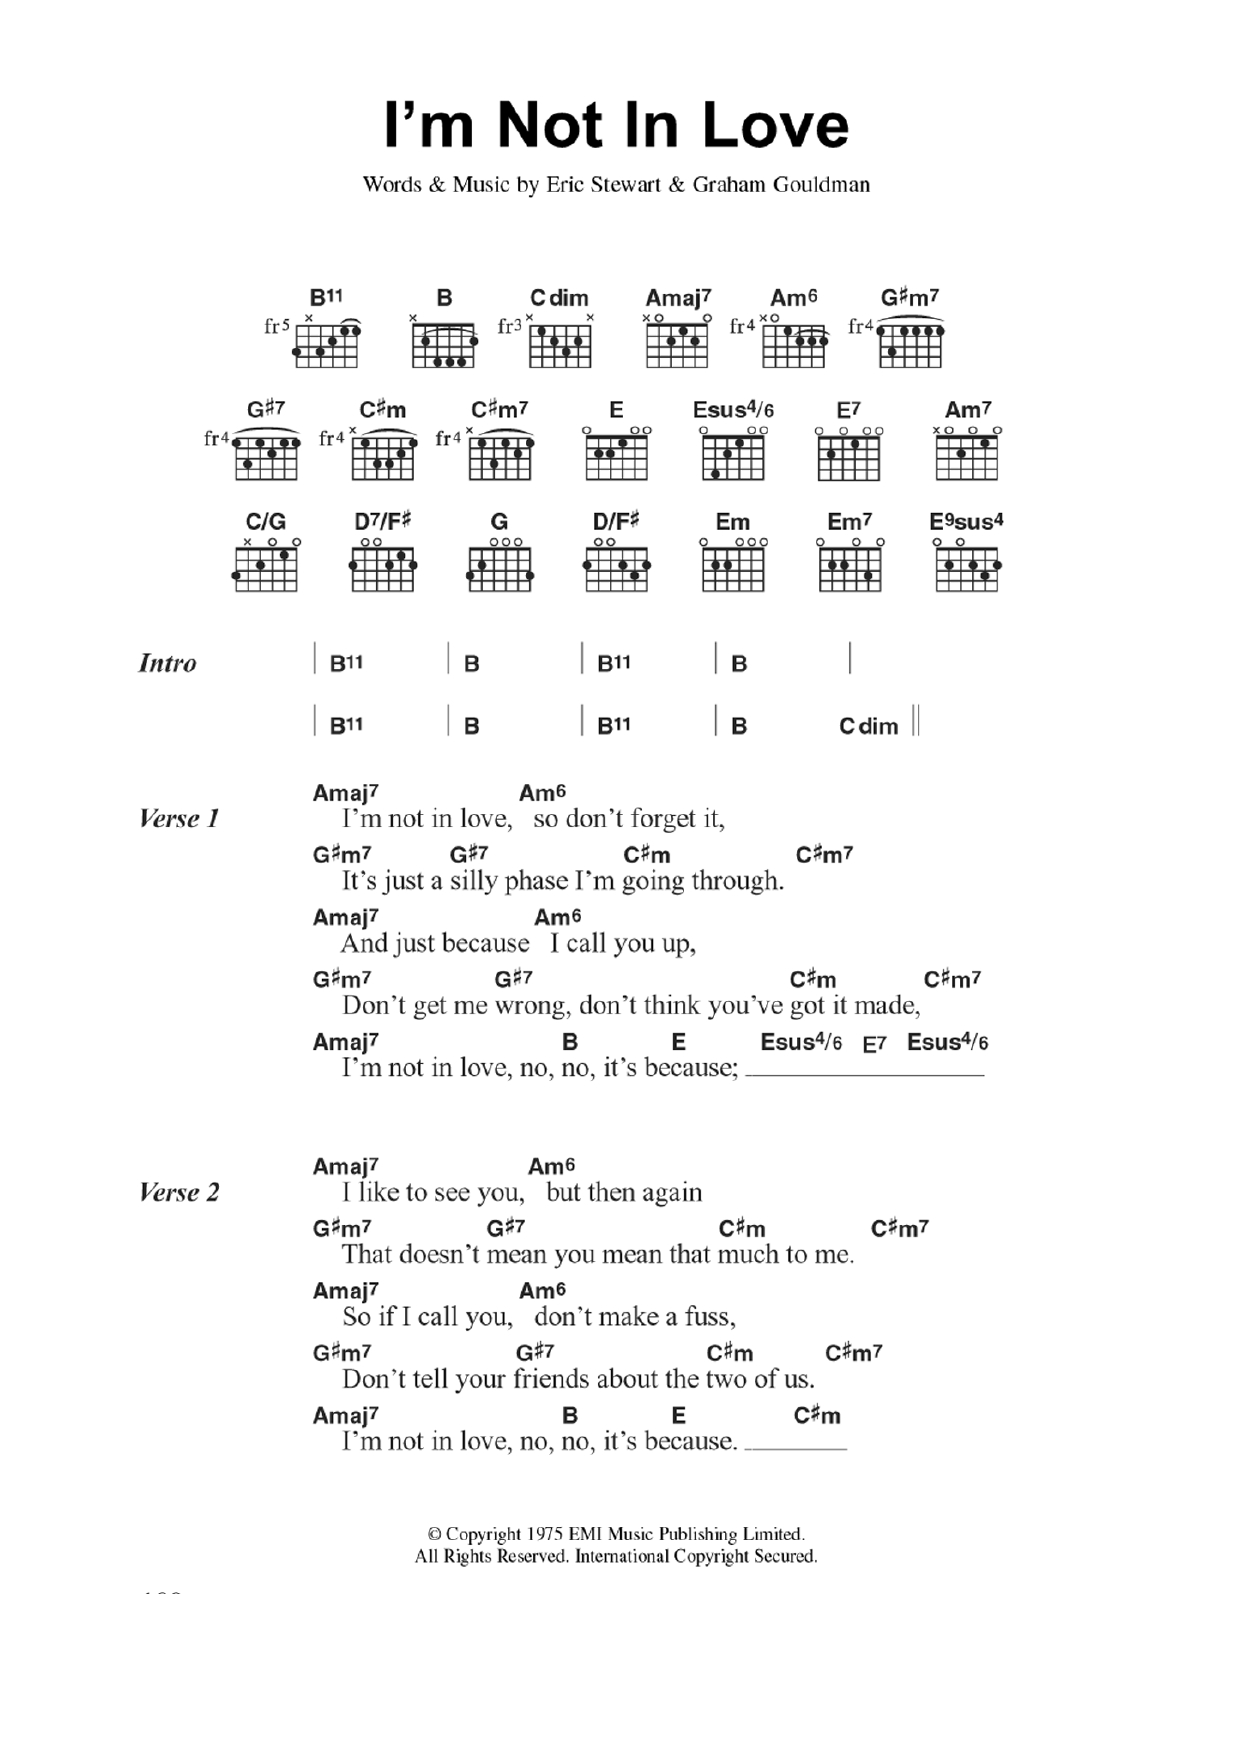 What's Going On Chords Im Not In Love 10cc Guitar Chordslyrics Guitar Instructor